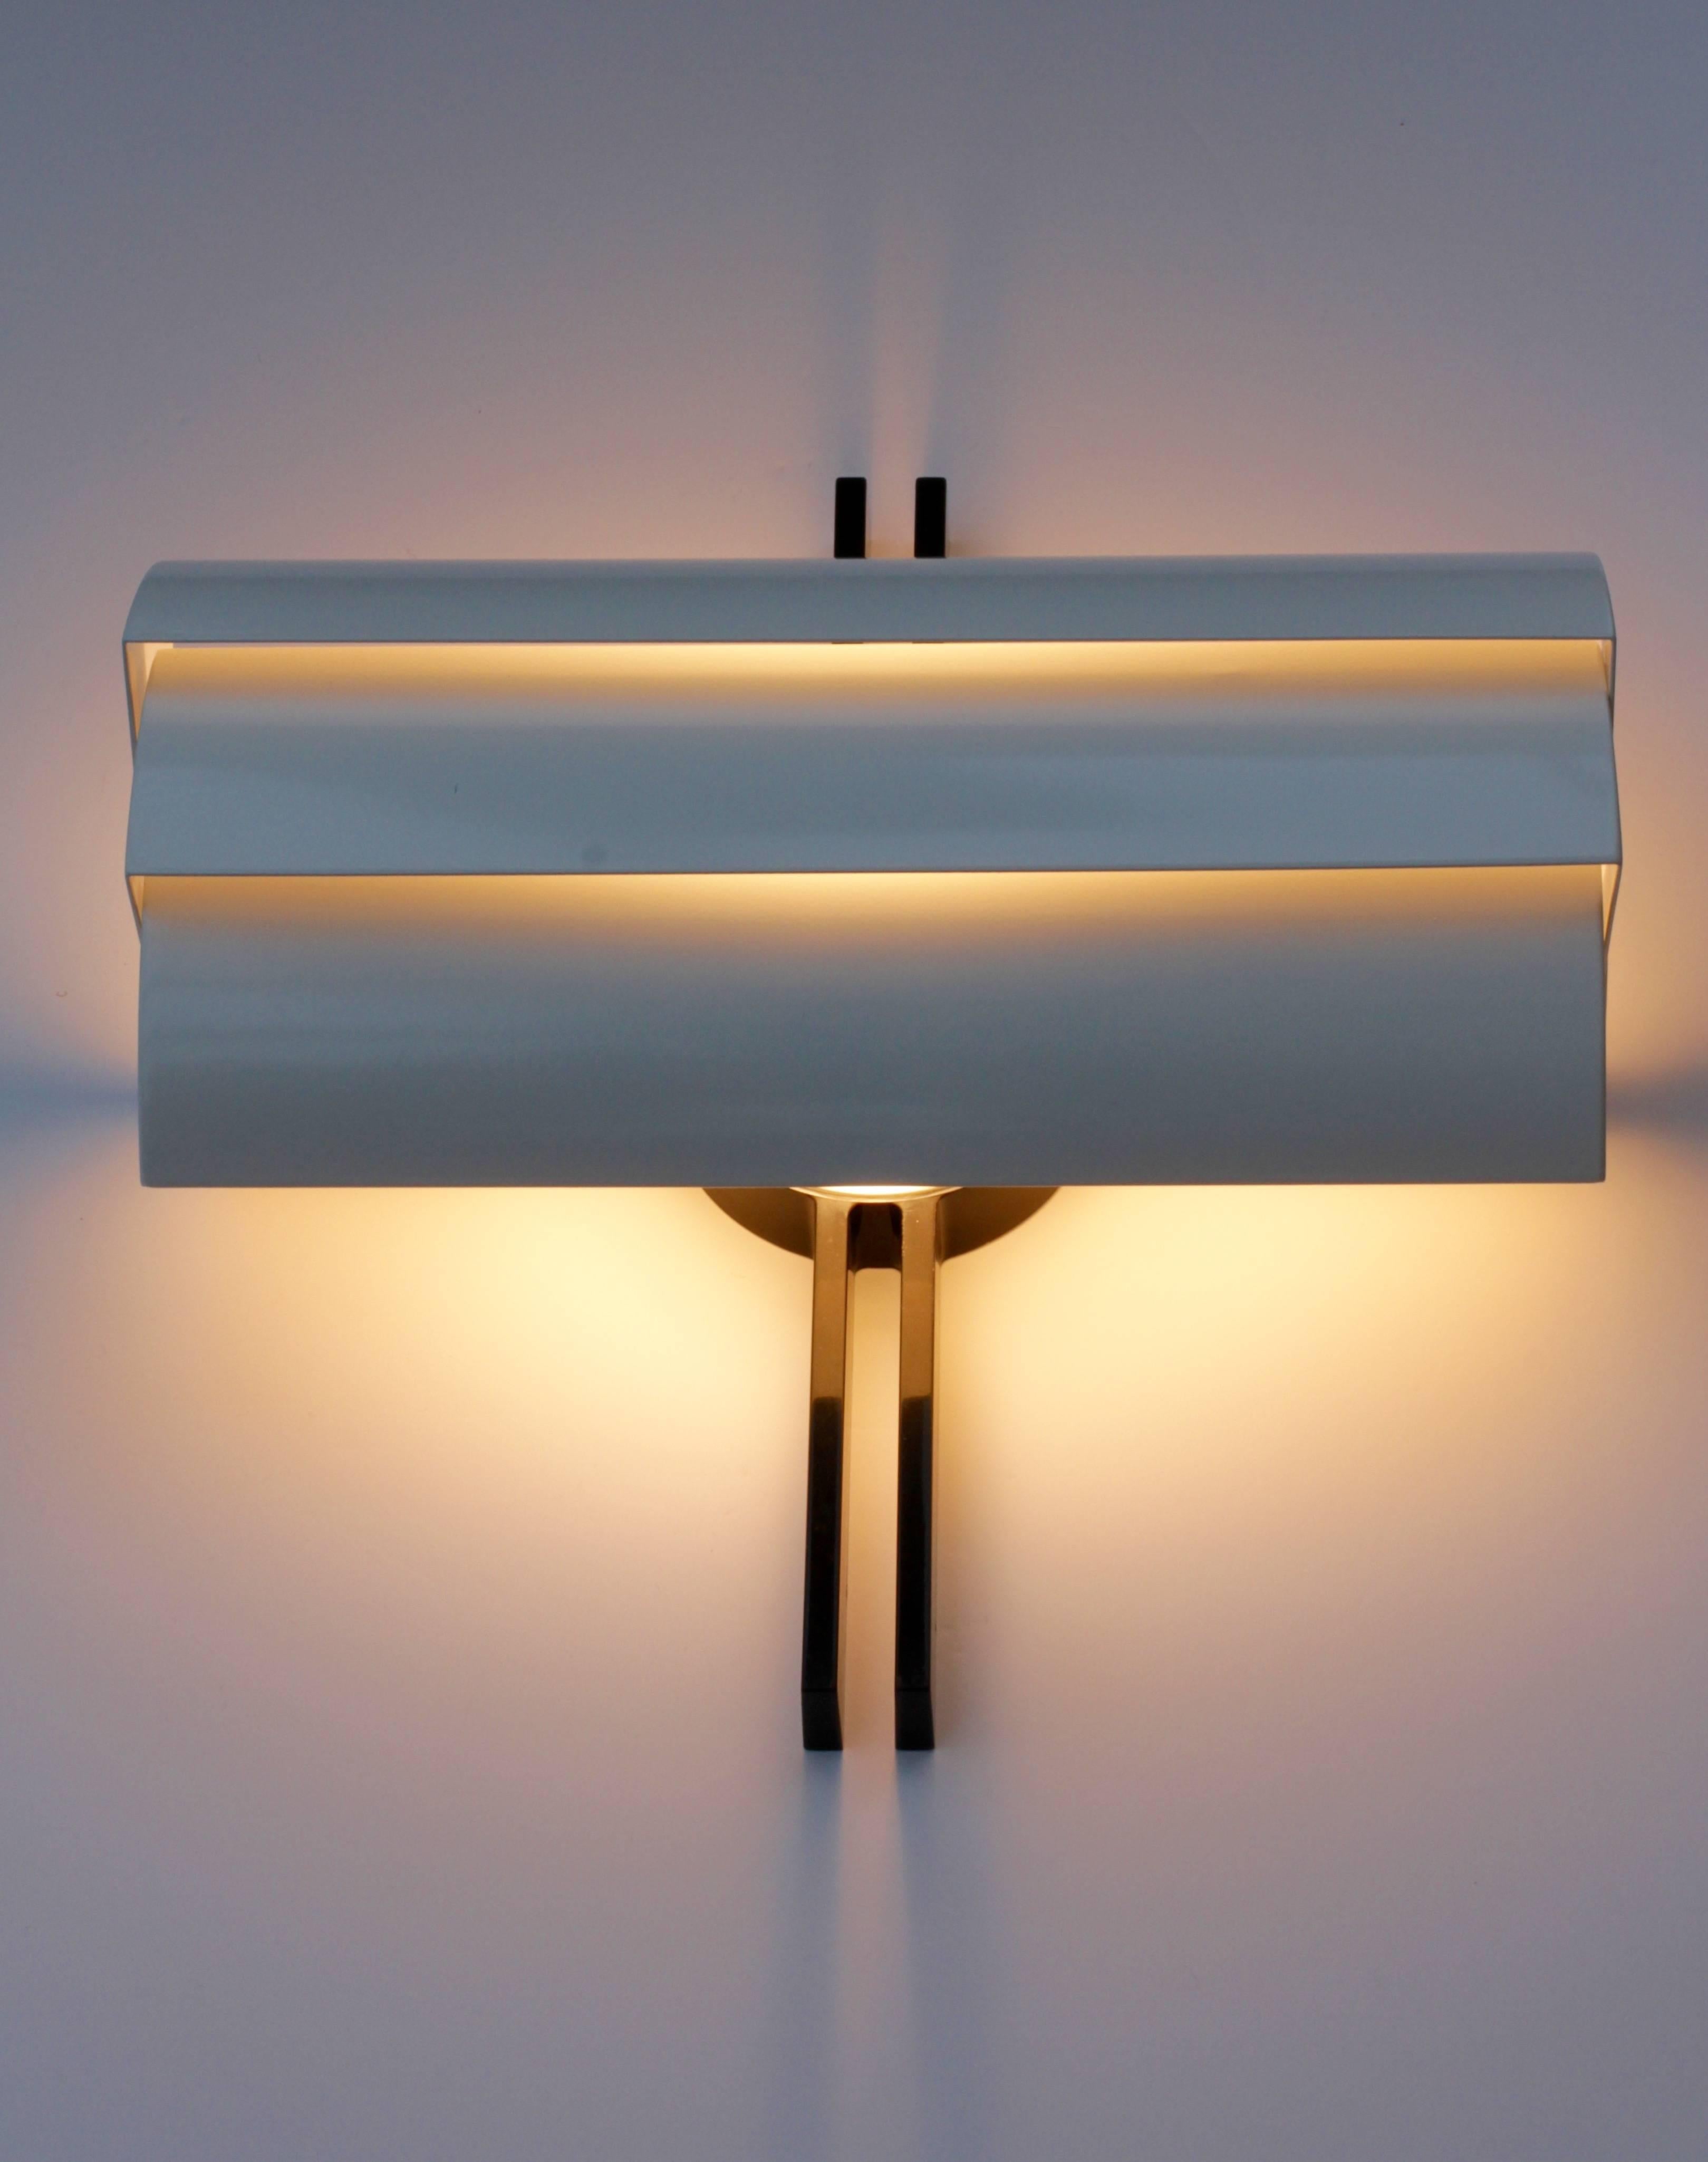 One of three stunning and large wall-mounted lights, lamps or sconces designed for Artemide by Ernesto Gismondi, circa 1980s. Featuring three independently adjustable white metal shades giving you the ability to direct the light wherever you see fit